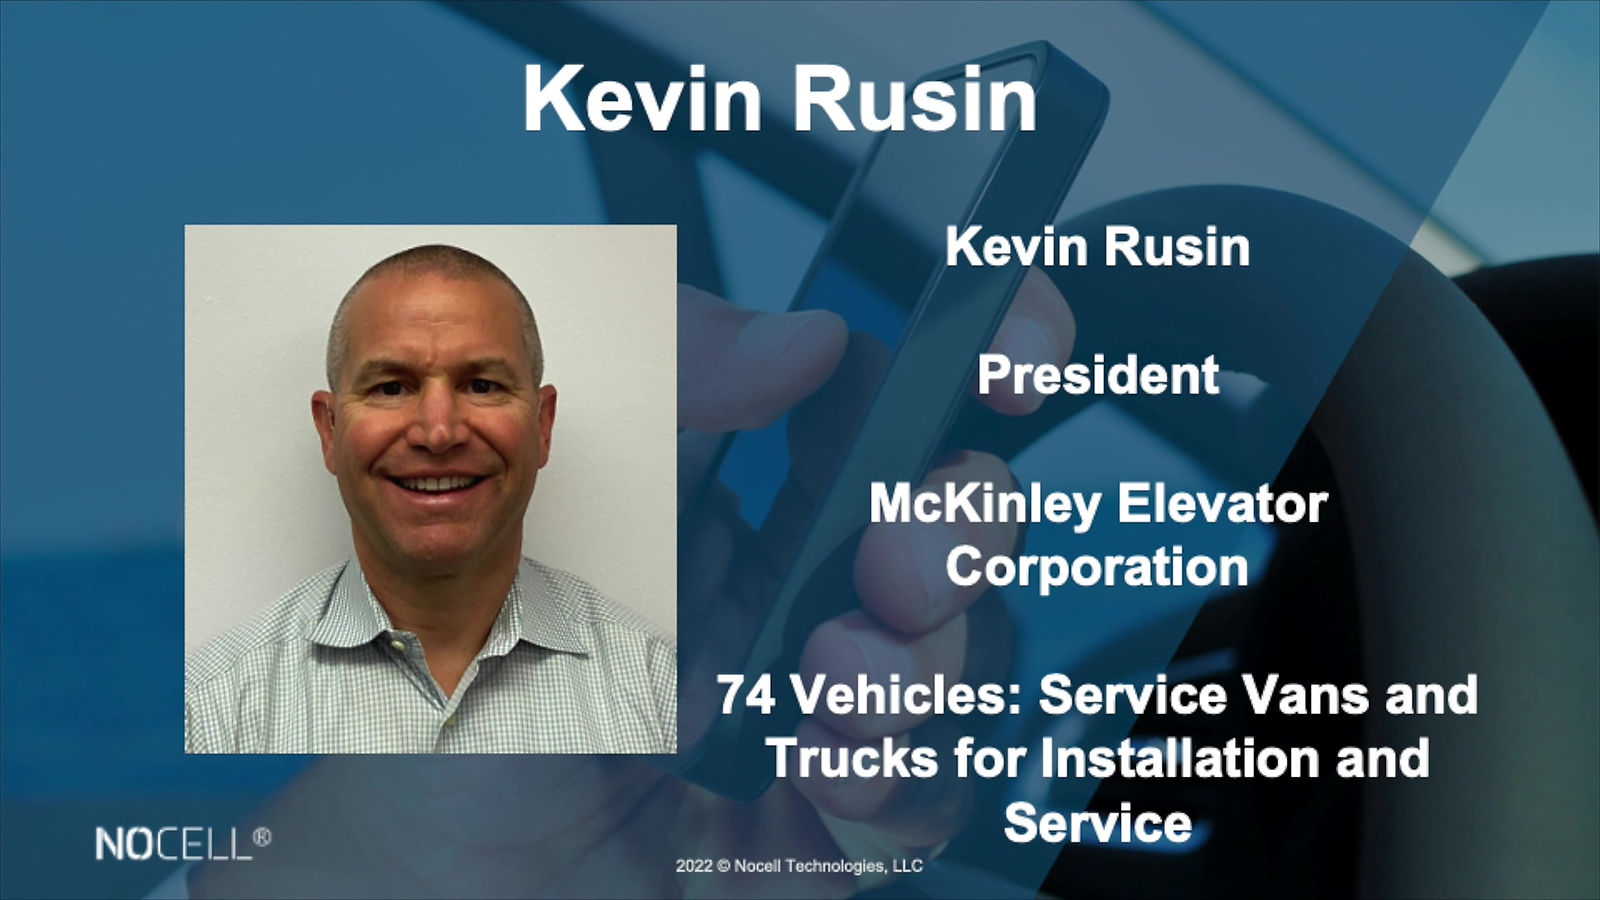 Kevin Rusin, President at McKinley Elevator